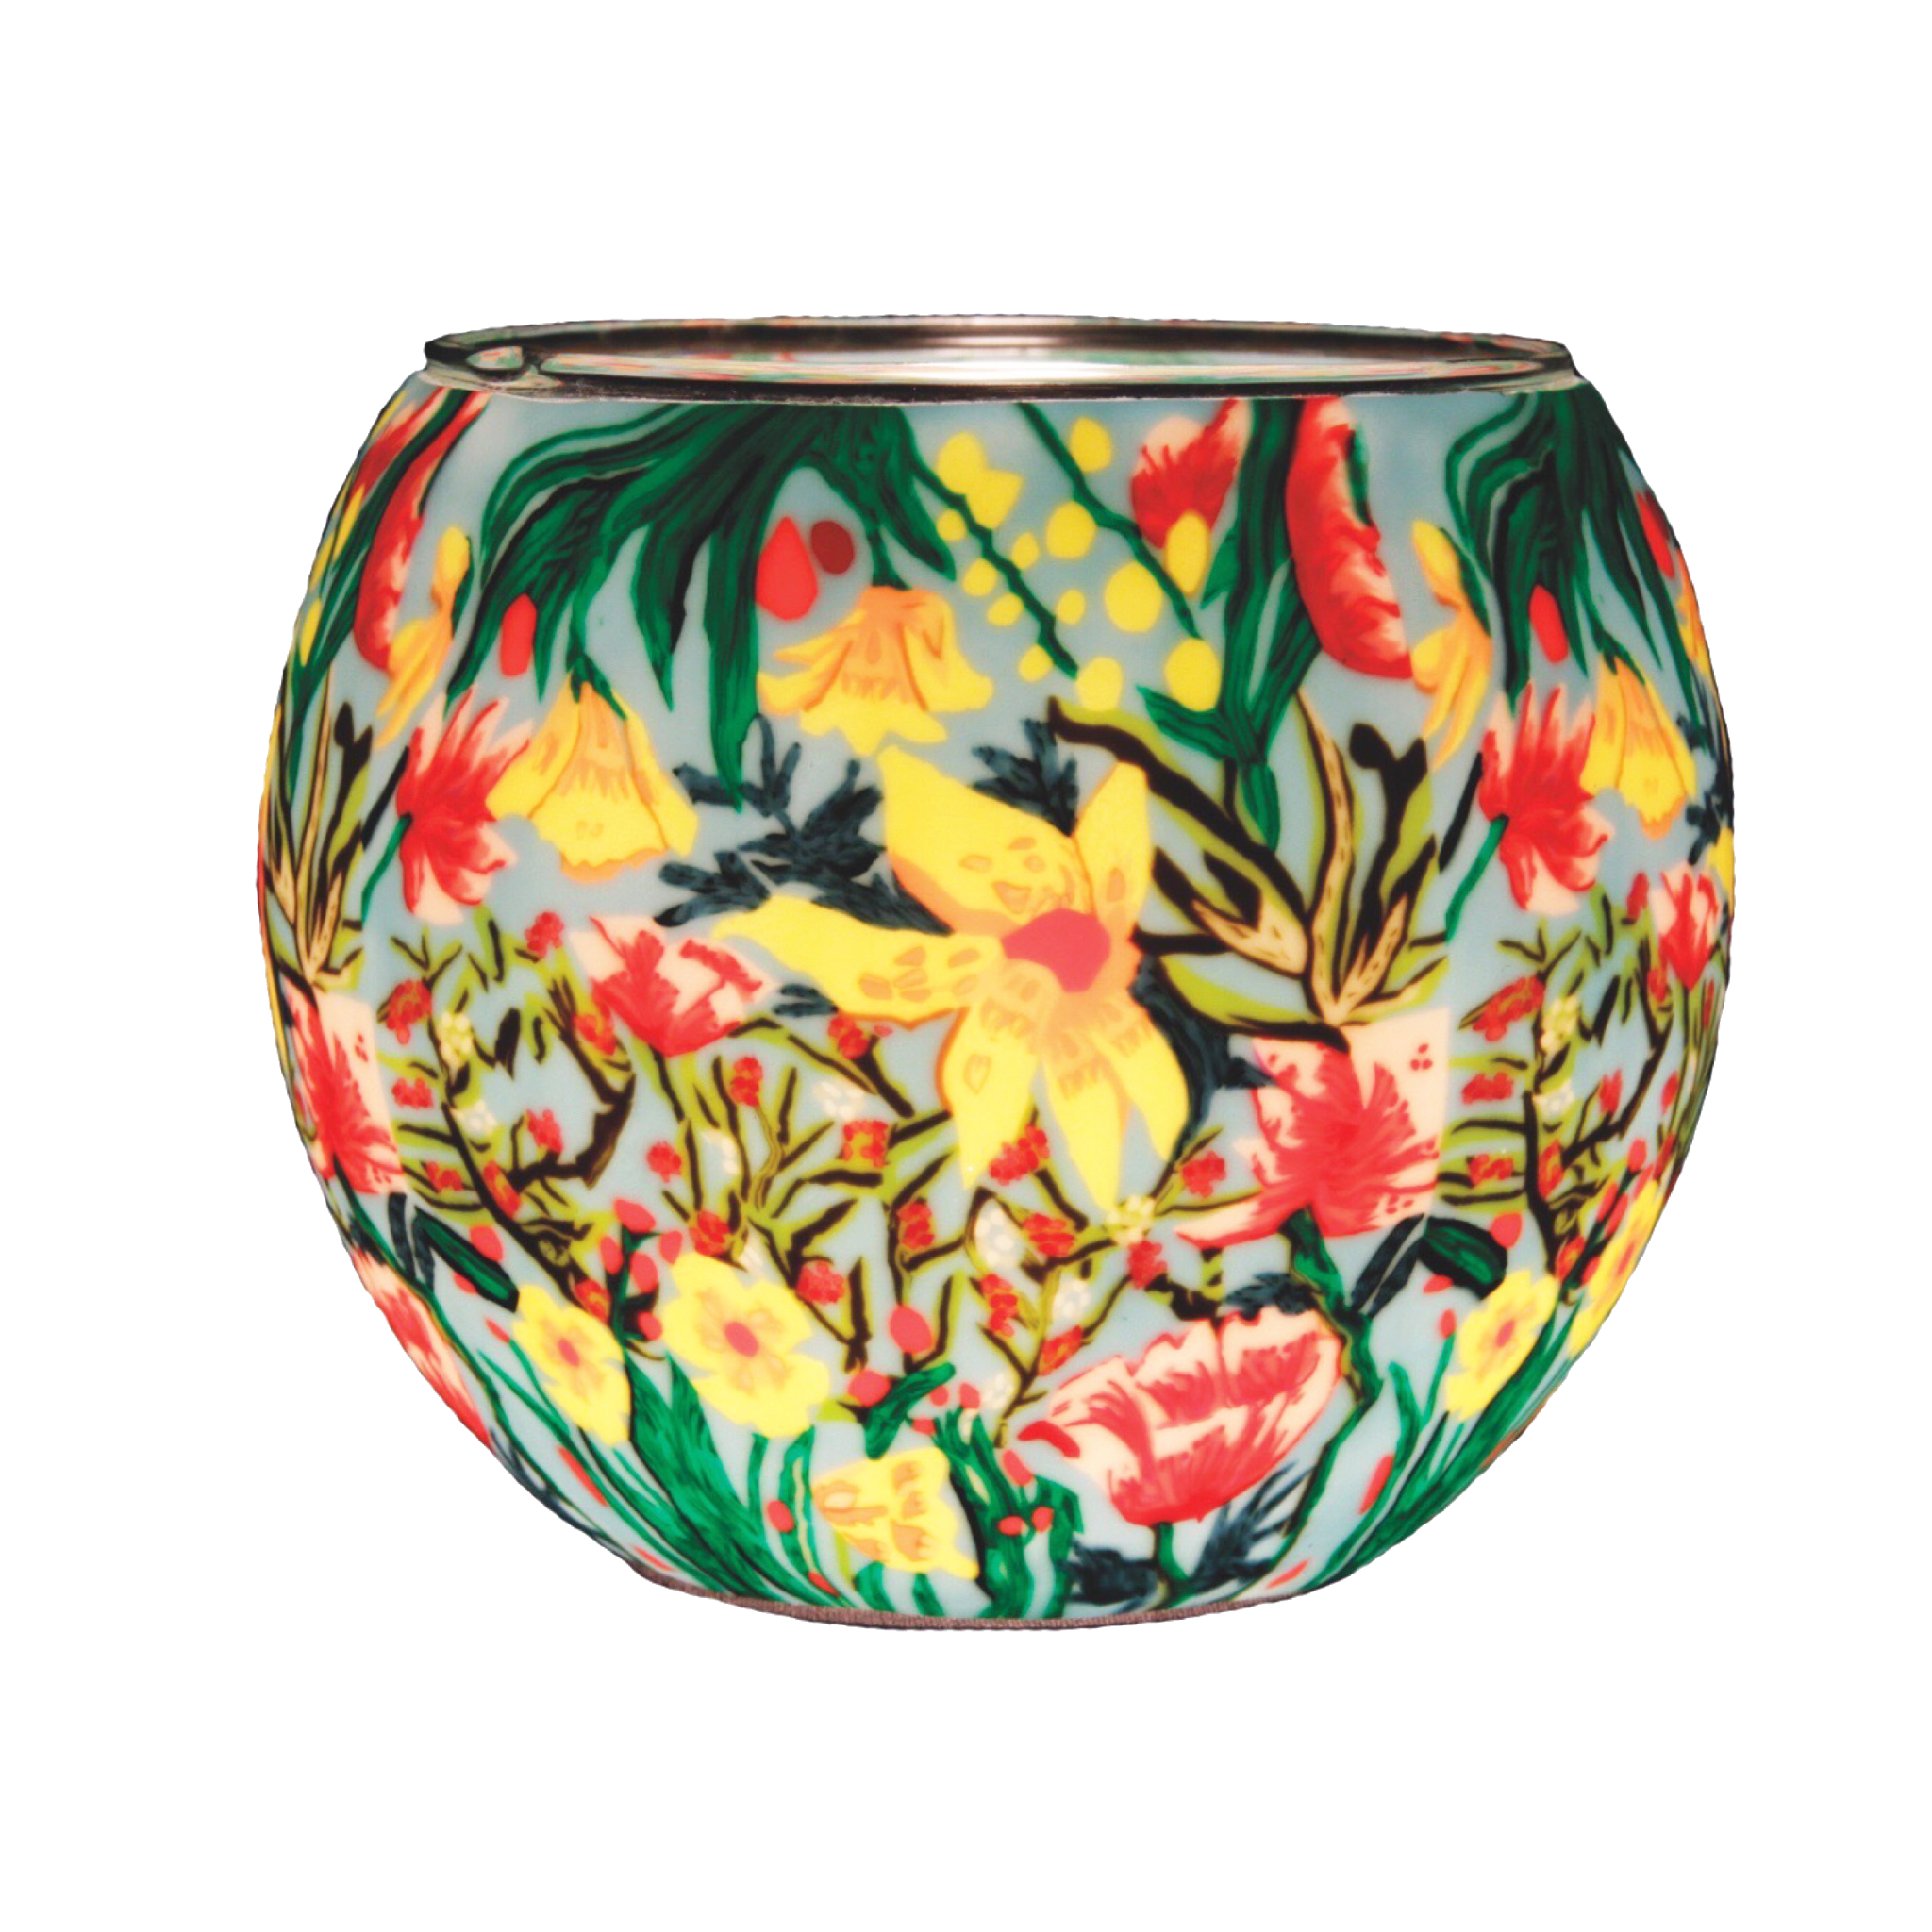 21412 Tropical Flowers, 11cm Glowing Glass, Pack of 6